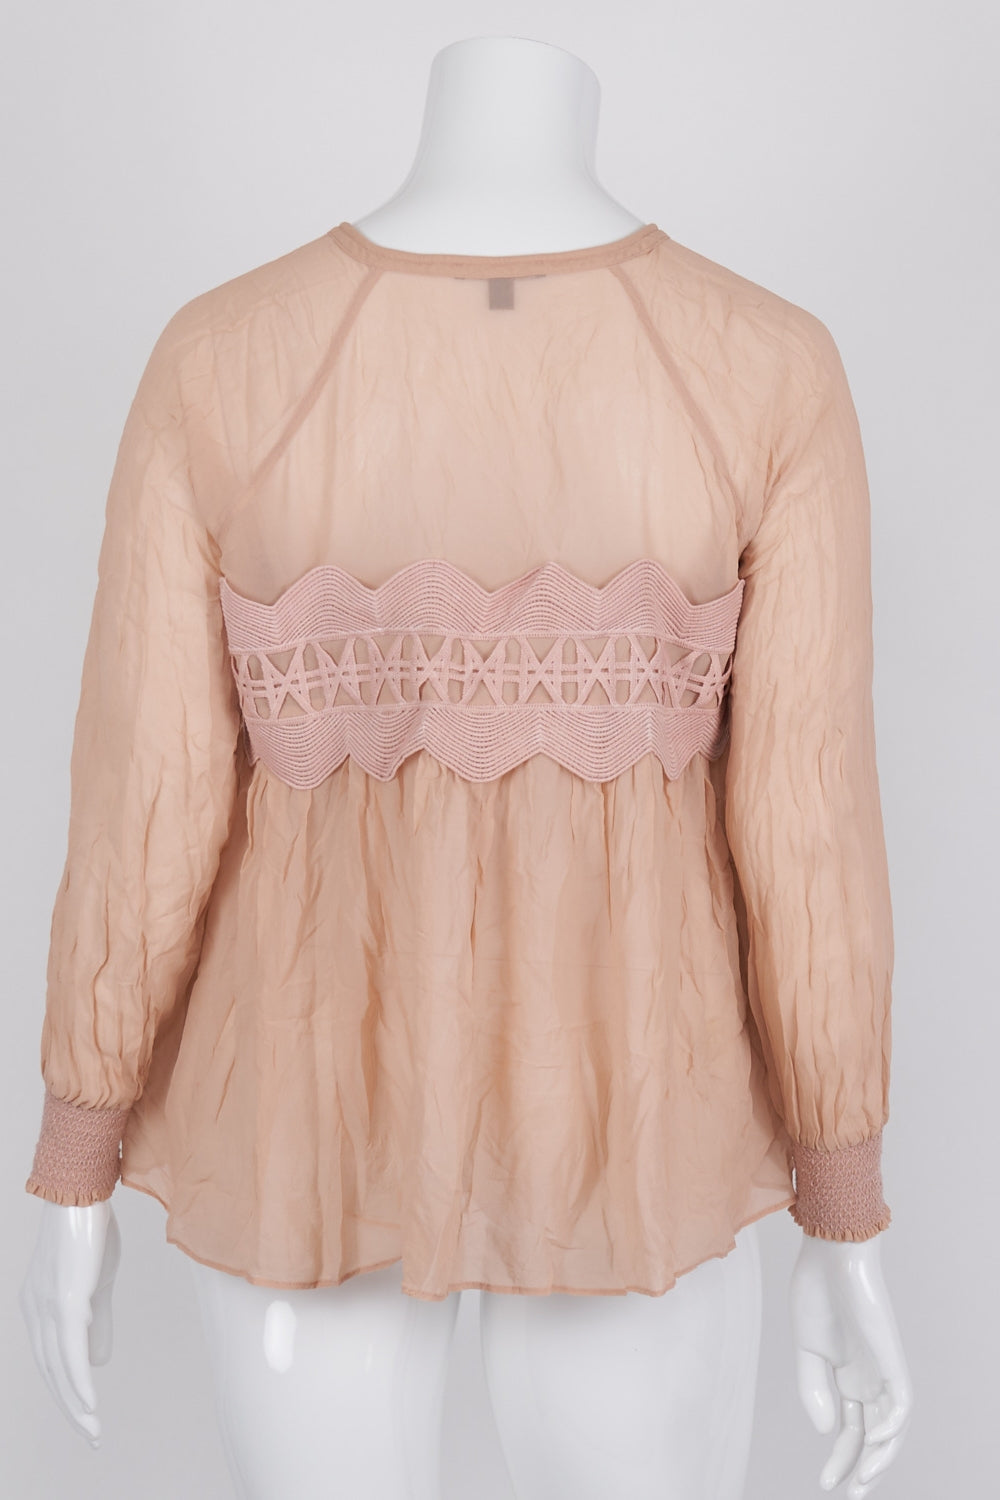 Country Road Pink Silk Top with Lace Pattern XL